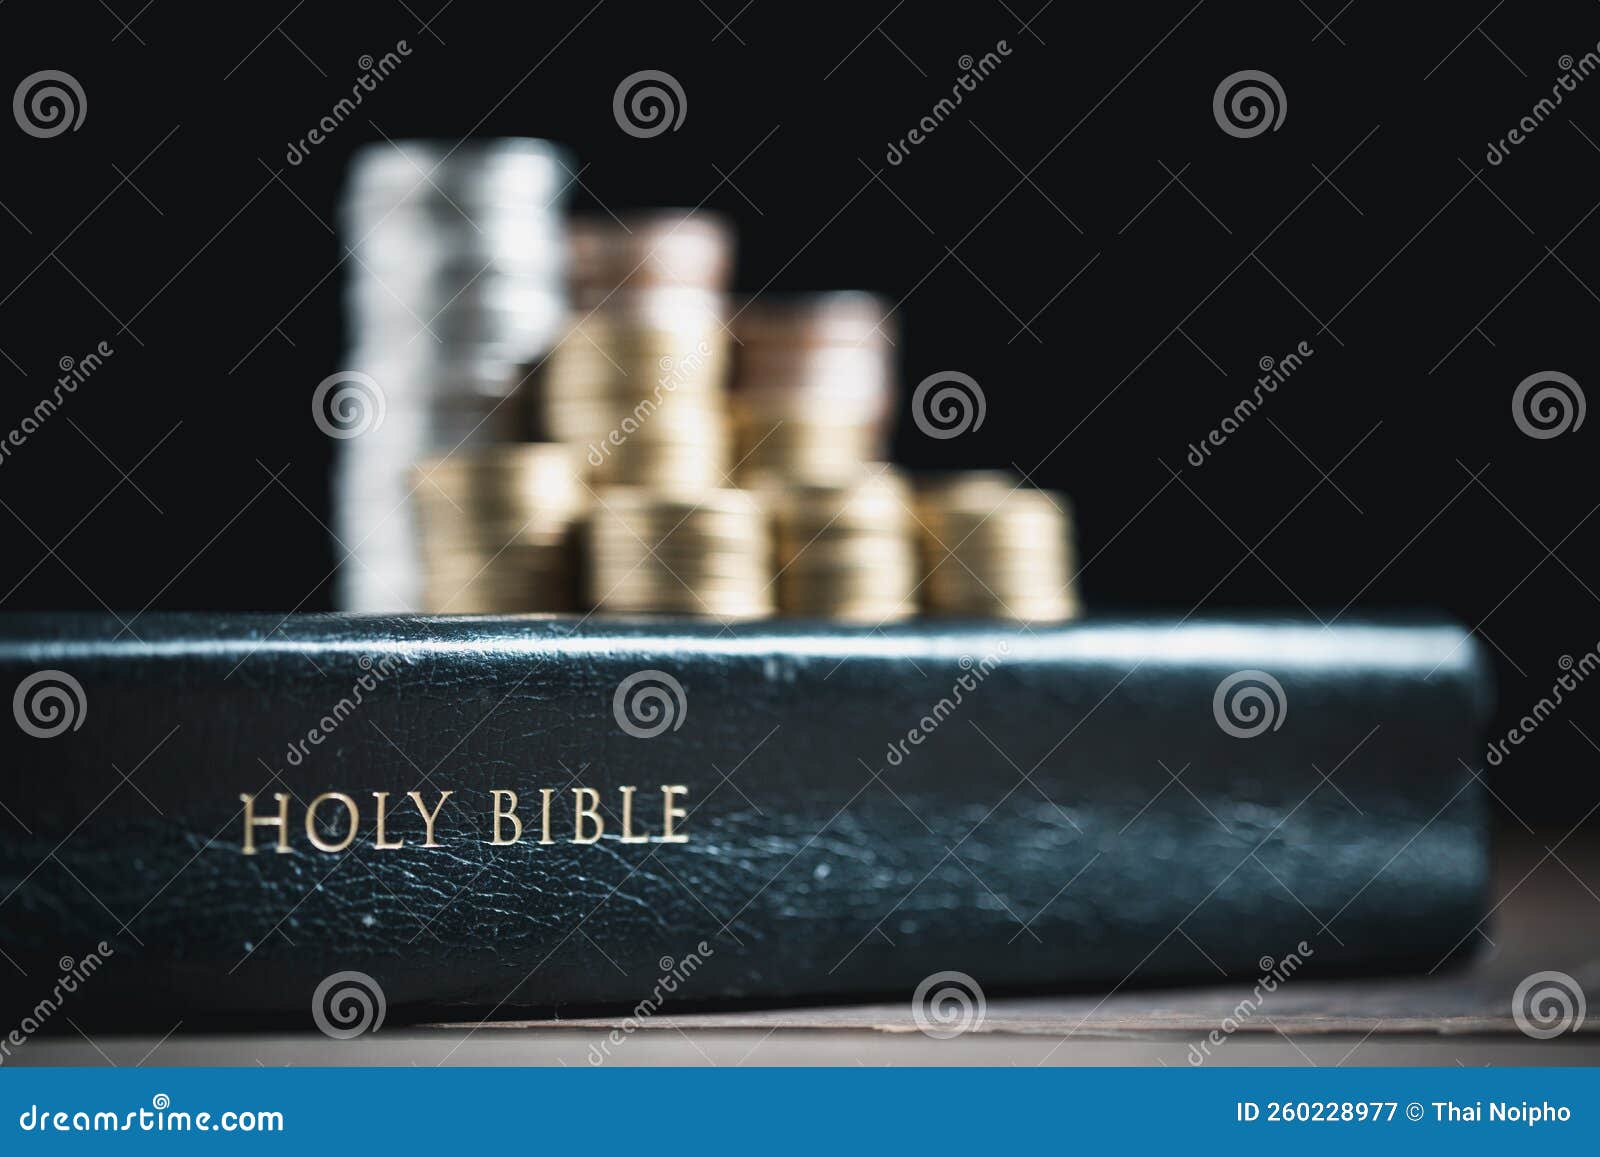 One Tenth Or Tithe Is Basis On Which Bible Teaches Us To Give One Tenth ...